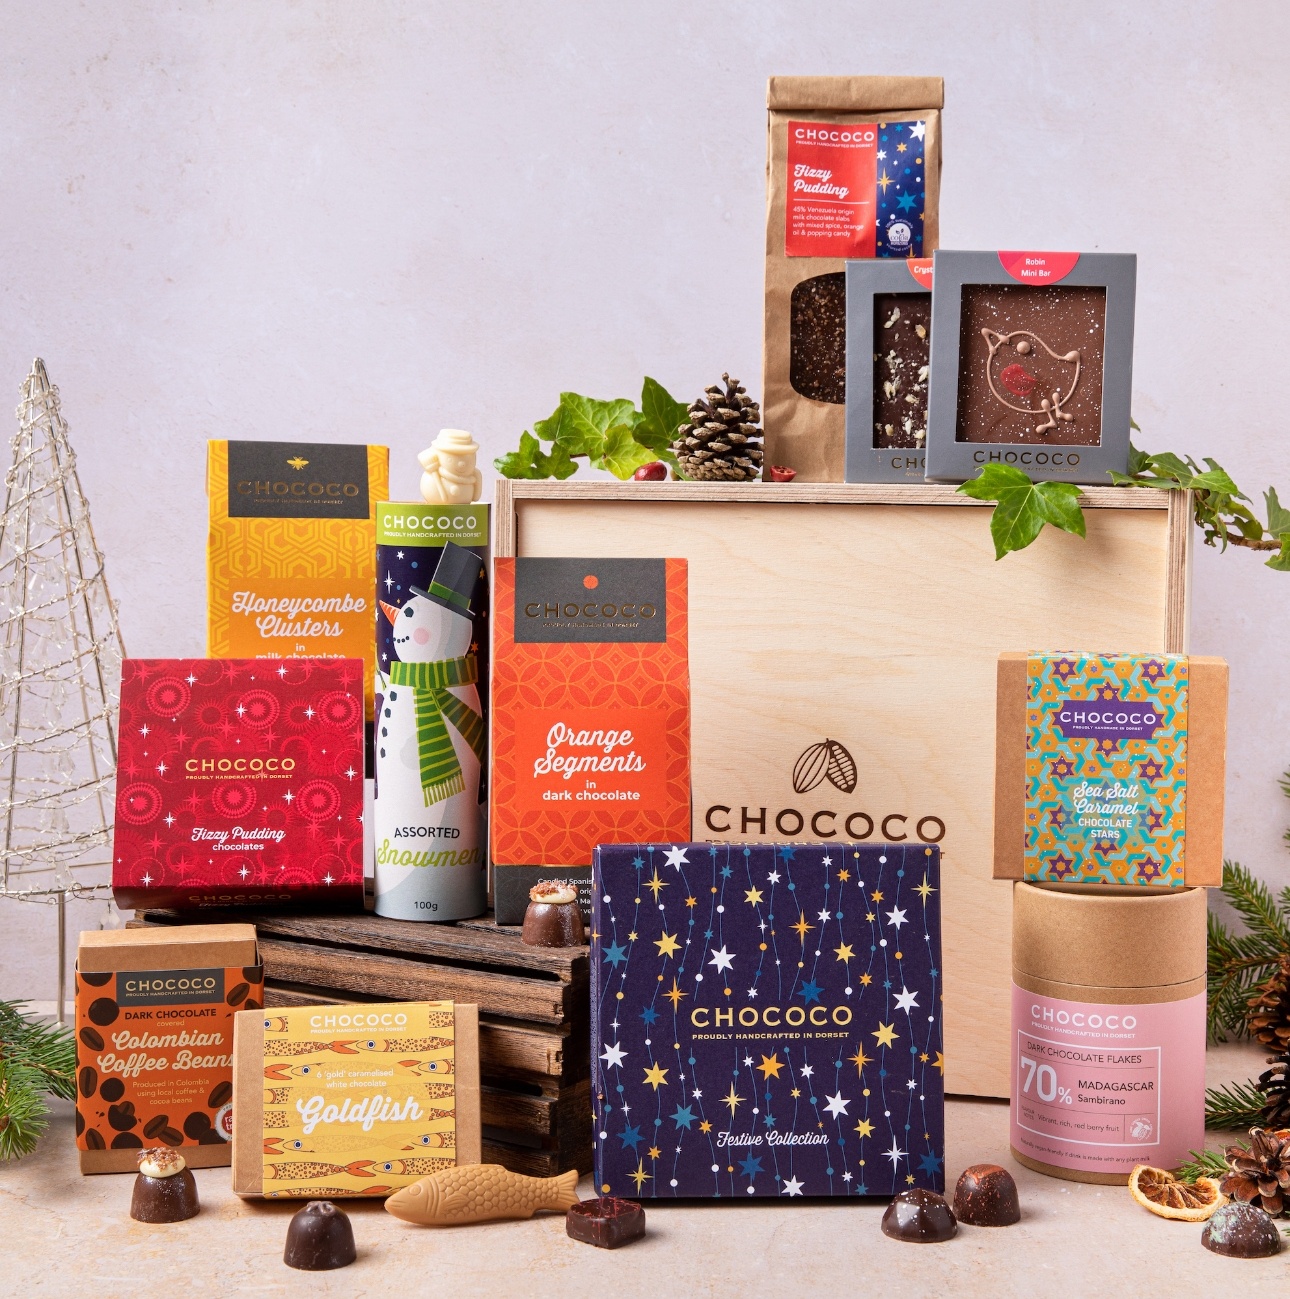 Chococo Christmas hamper in a wooden box